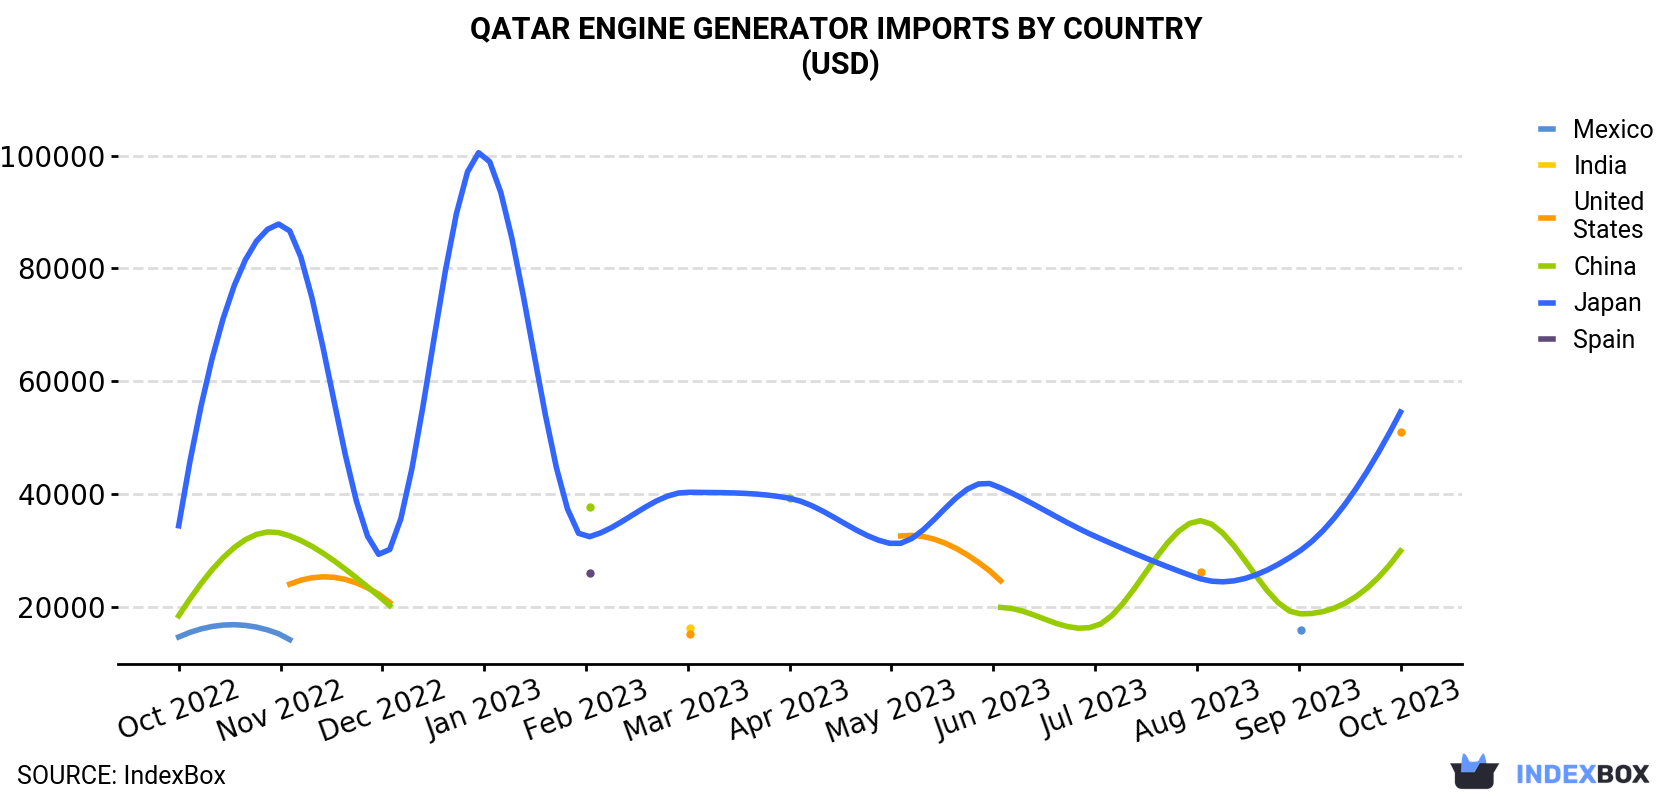 Qatar Engine Generator Imports By Country (USD)